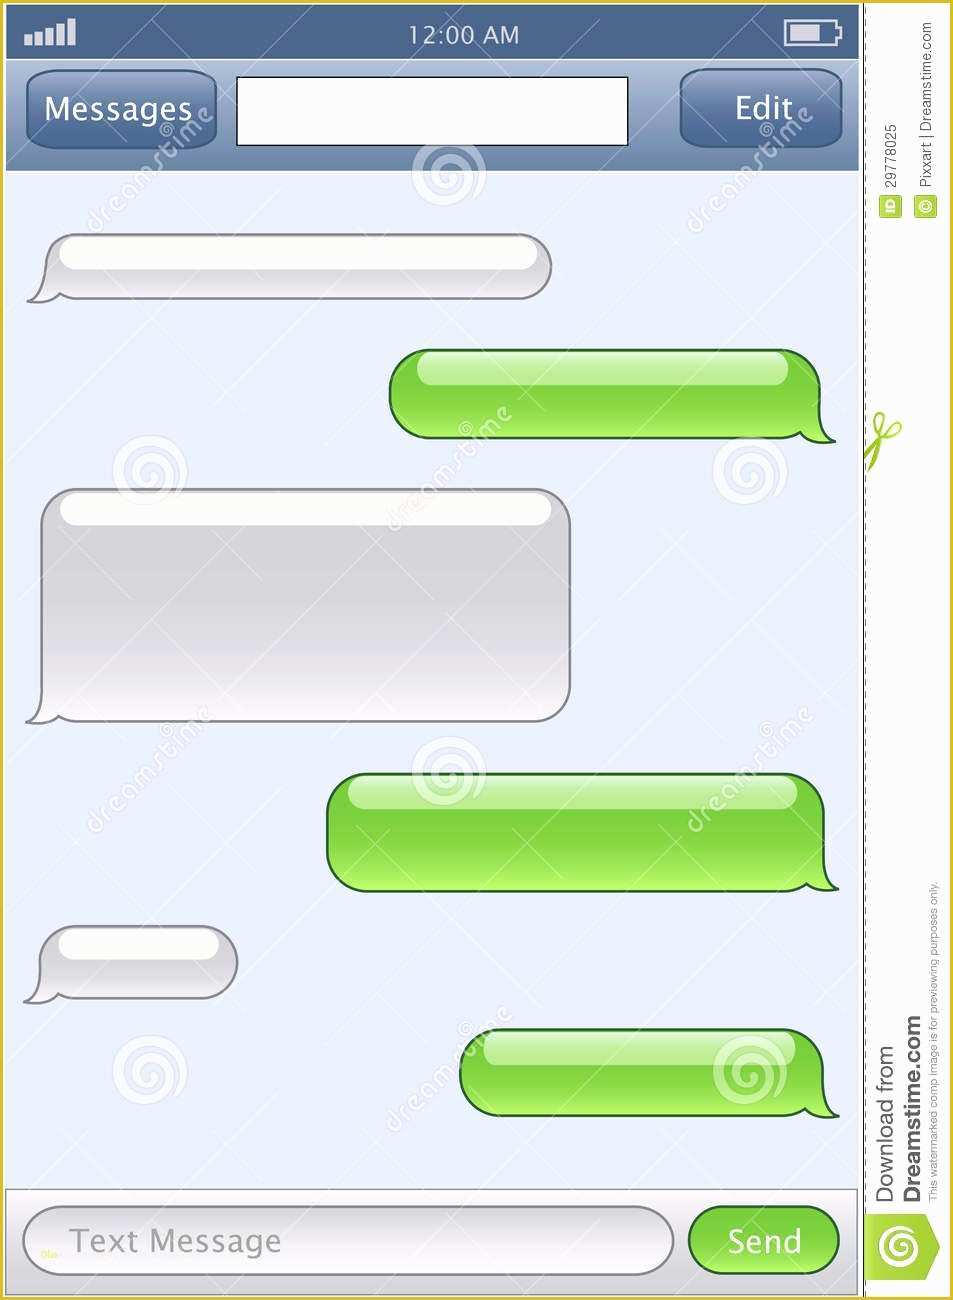 Free Chatting Website Templates Of Fresh Text Message Template